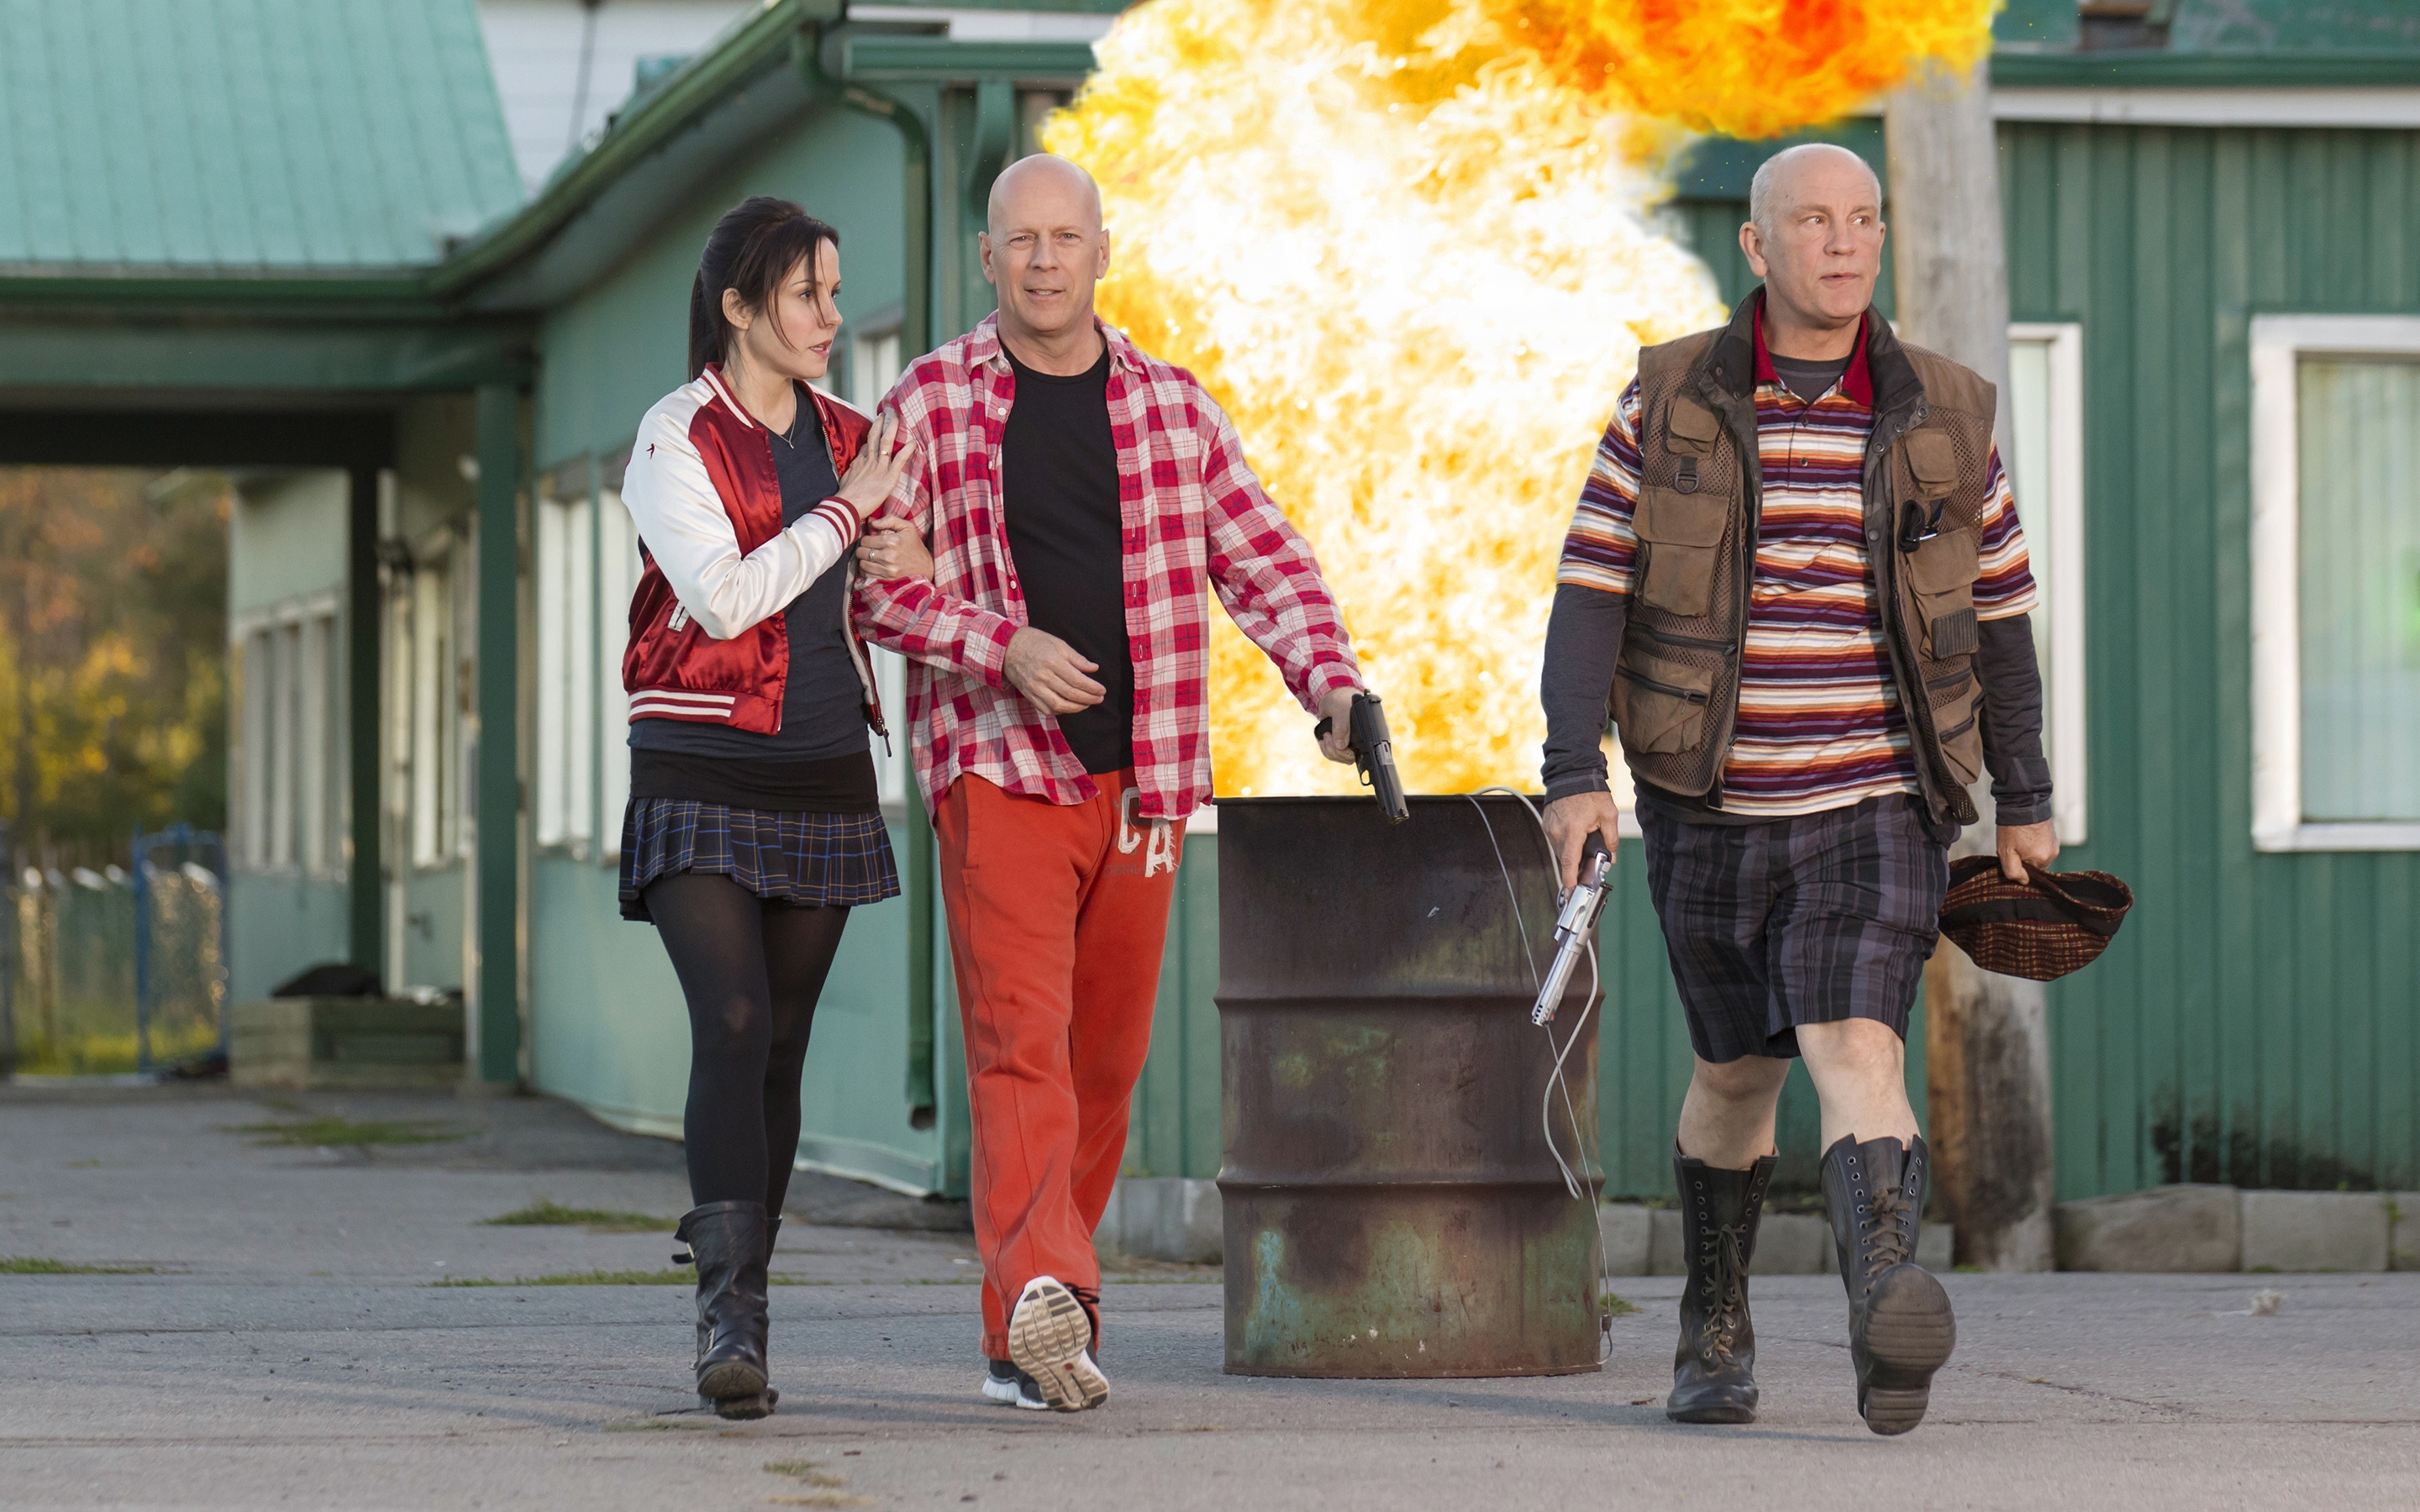 Red 2 Movie 2013 for 2880 x 1800 Retina Display resolution